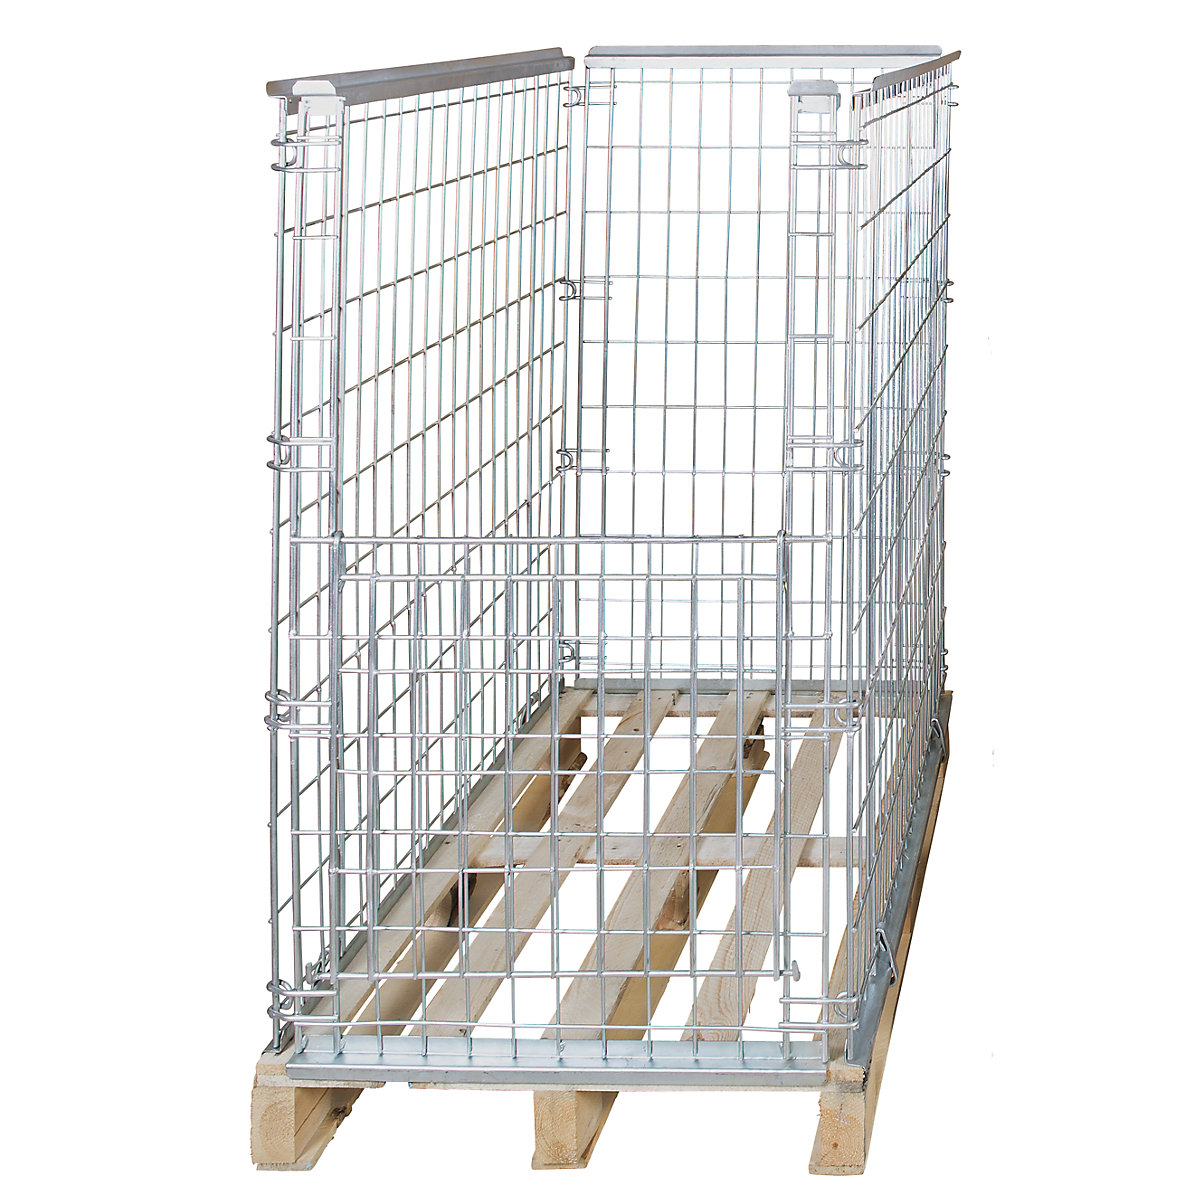 Mesh stacking frame for EURO pallet, with drop gate on 1 front wall, effective height 1160 mm